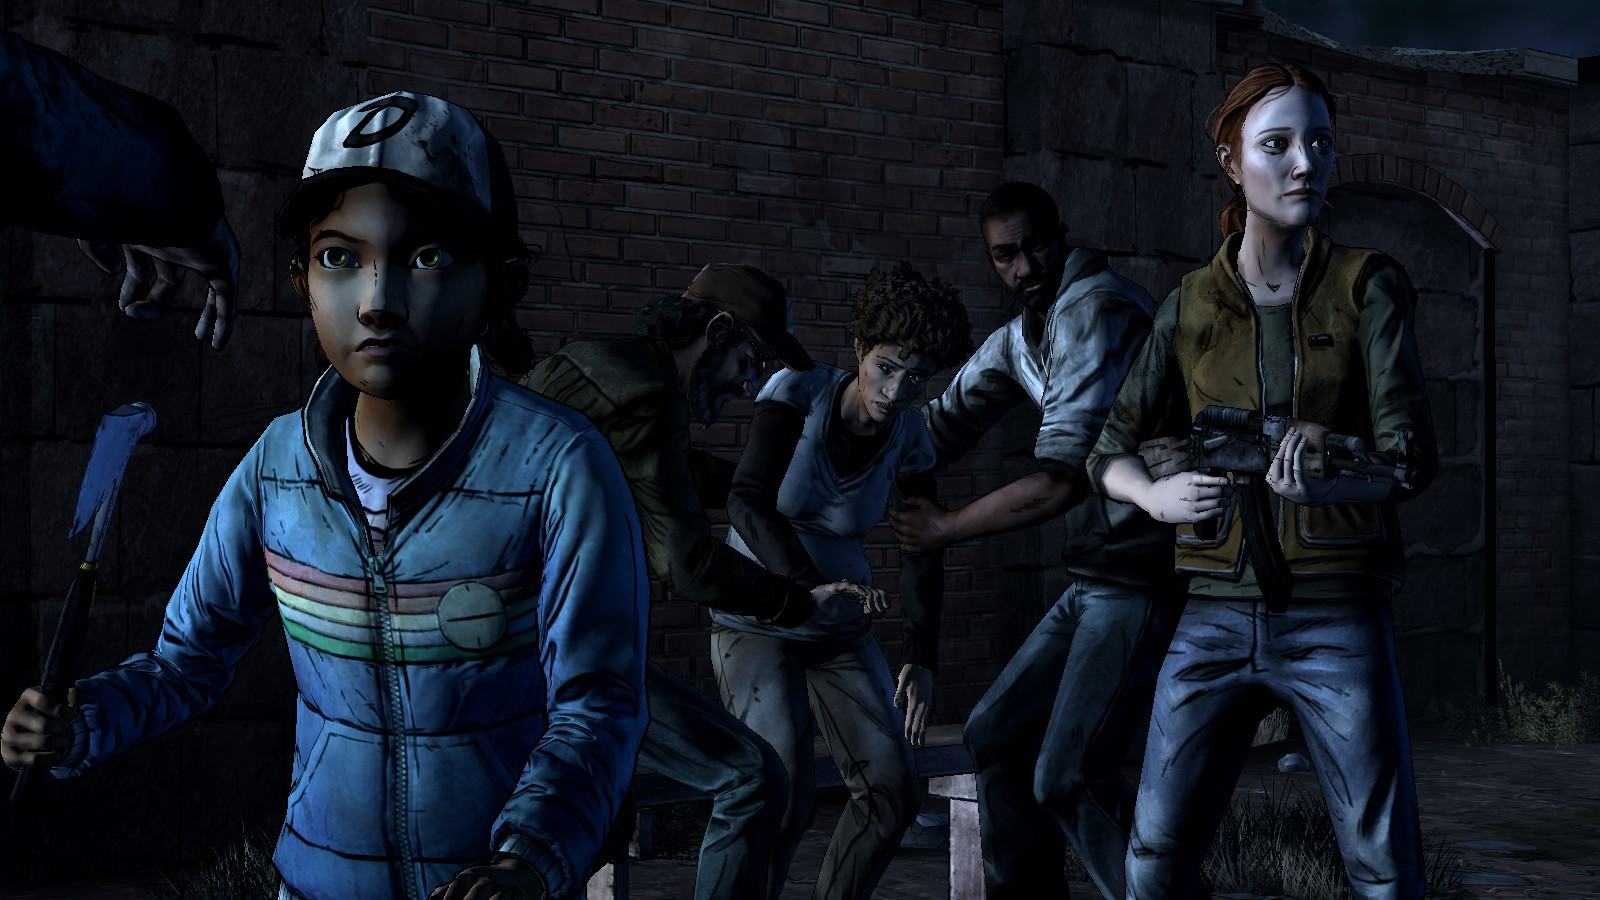 Geek insider, geekinsider, geekinsider. Com,, the walking dead game s2 e4 "amid the ruins" review, gaming